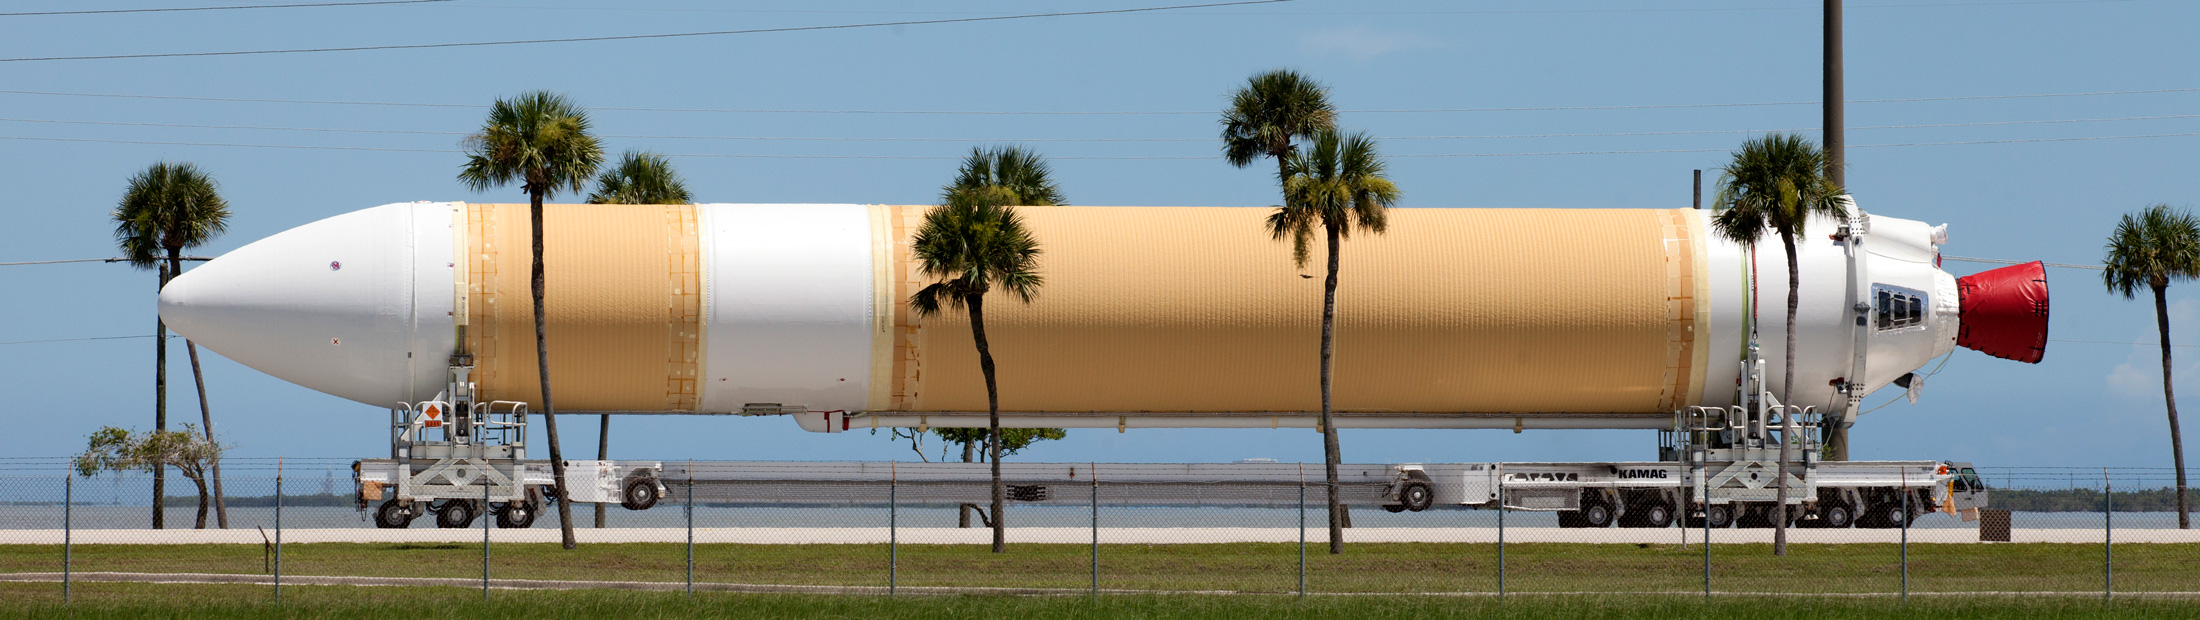 One of the Delta IV rockets